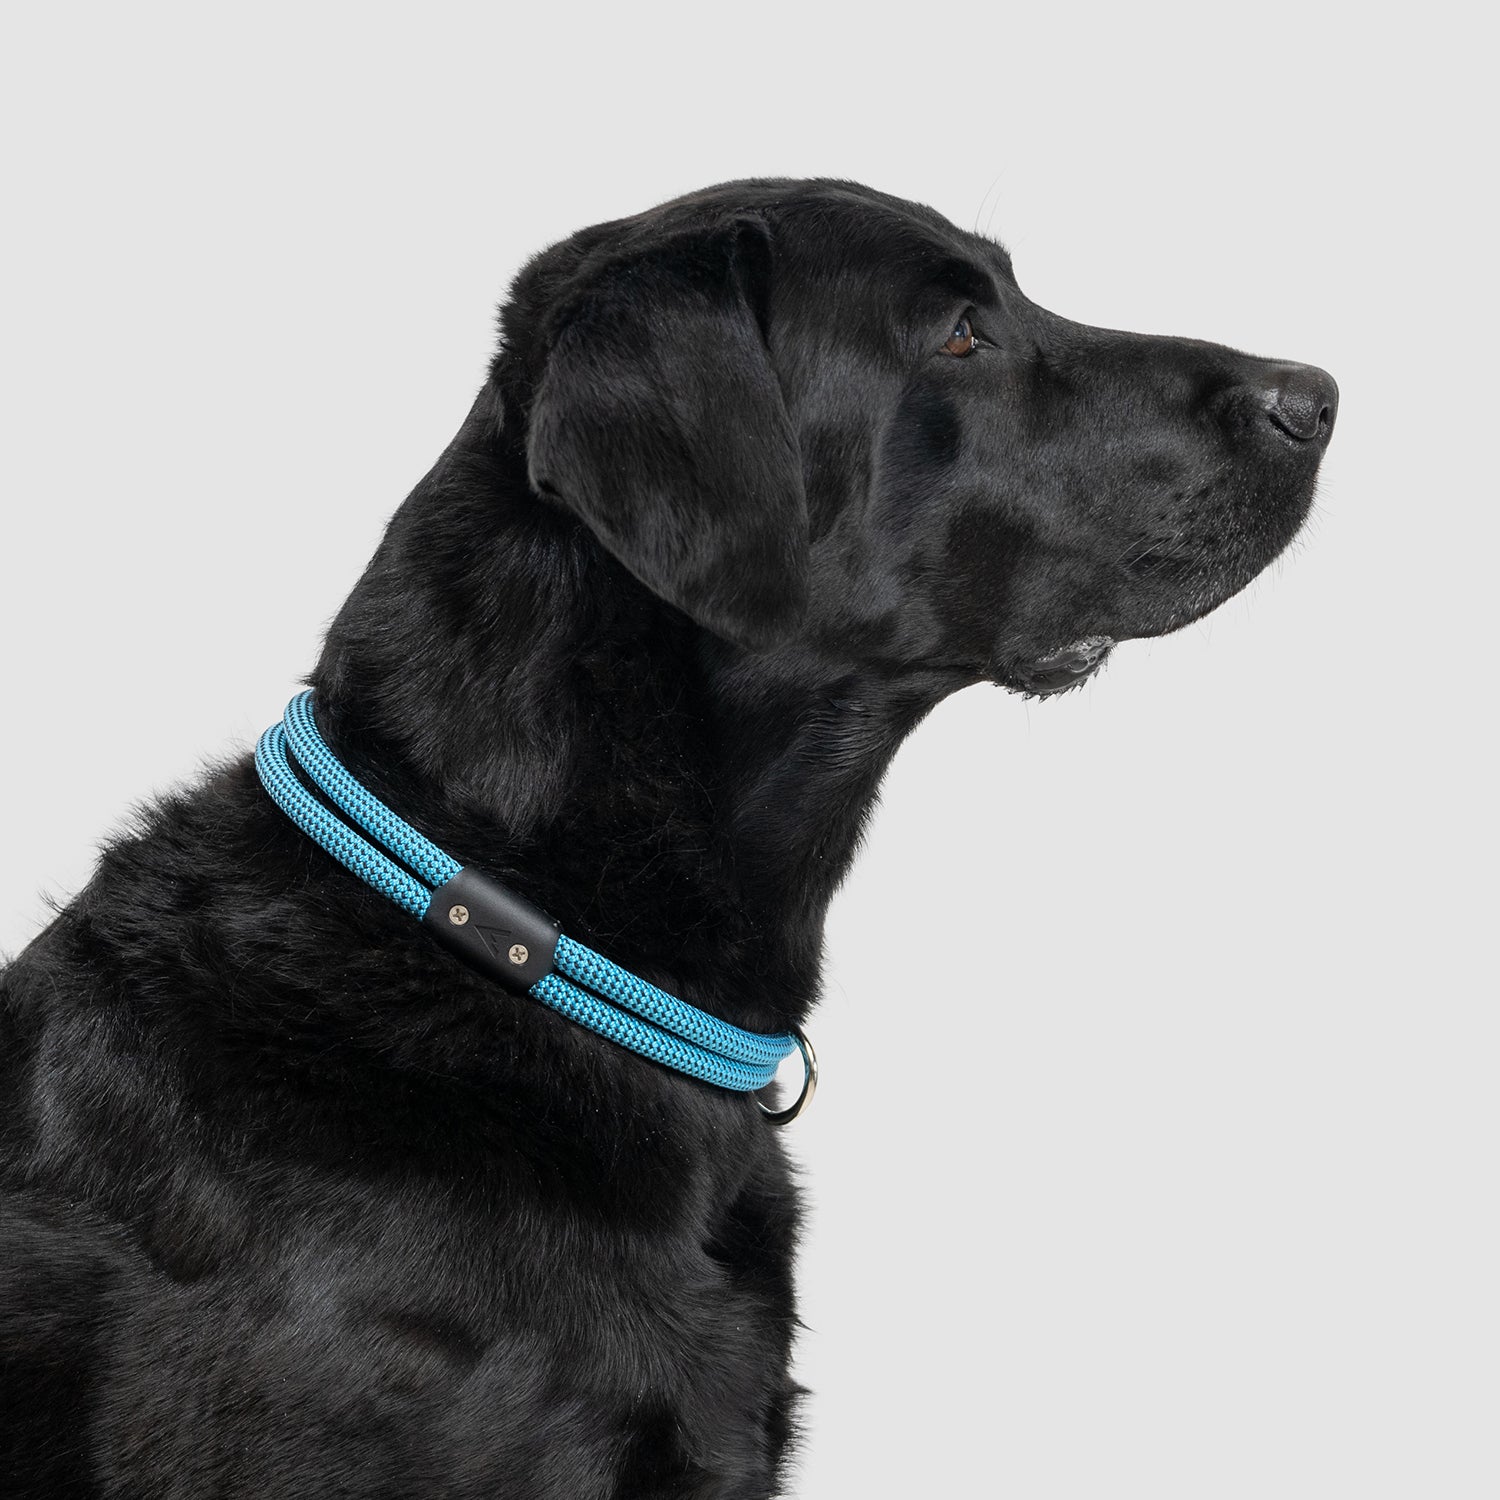 lifetime collar fixed length rope collar for active dogs handmade in colorado by atlas pet company --glacier